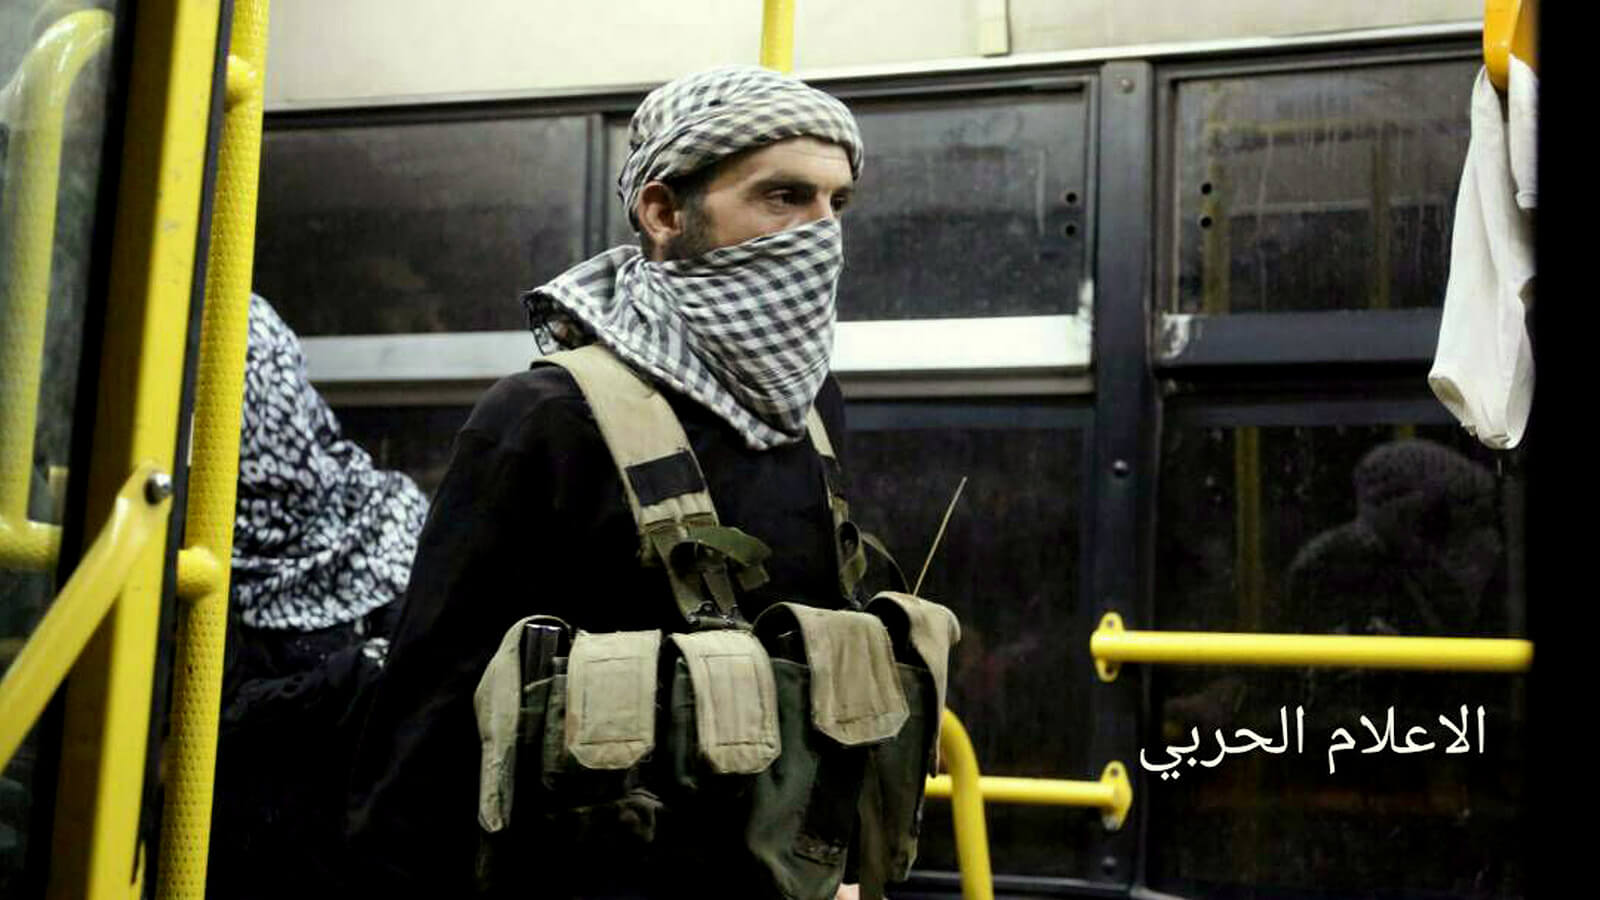 An al-Qaeda-linked militant standing in a bus, after being evacuated from the town of Arsal, near the Syrian border, in northeast Lebanon route to the rebel-held Idlib province in northwest Syria. Syrian Central Military Media via AP